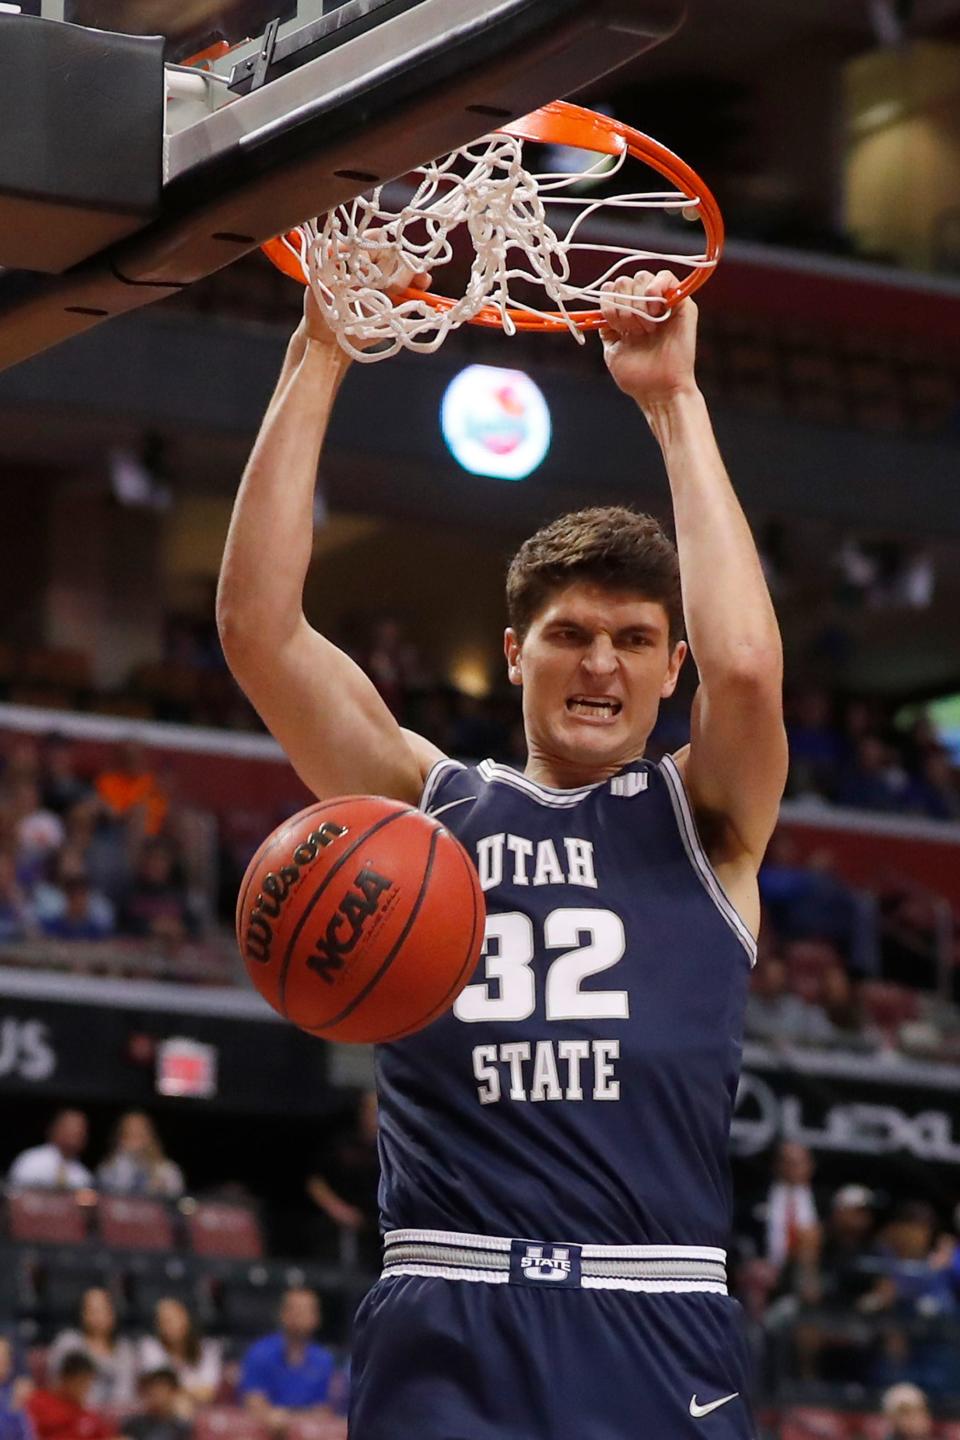 Utah State center Trevin Dorius dunks the ball in the first half of an NCAA college basketball game against Florida, part of the Orange Bowl Classic tournament, Saturday, Dec. 21, 2019, in Sunrise, Fla. (AP Photo/Wilfredo Lee)